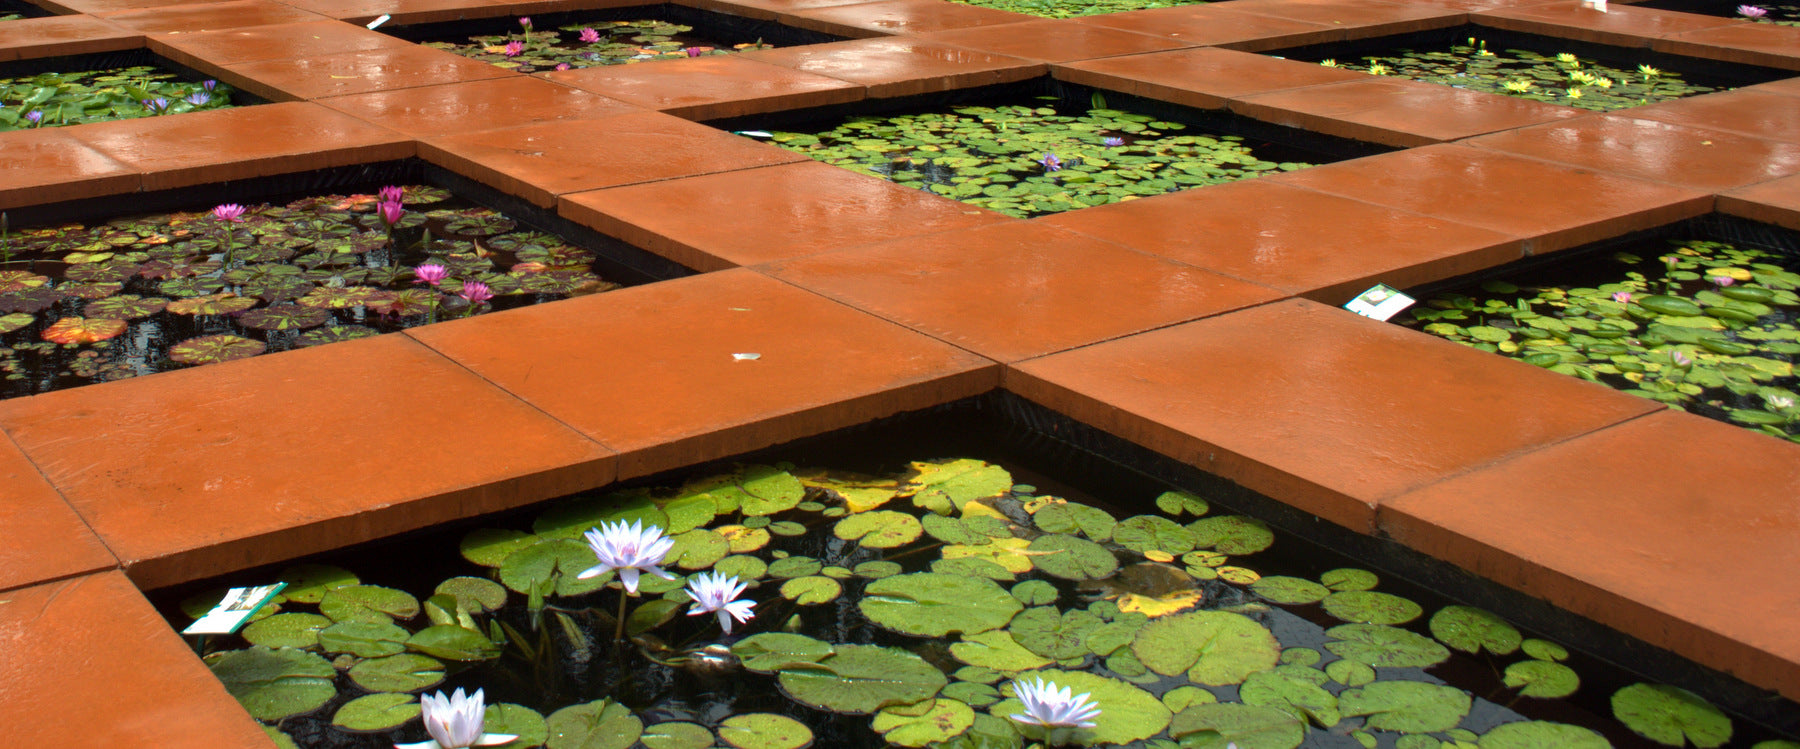 Water Lily Ponds on display at The Lily Farm